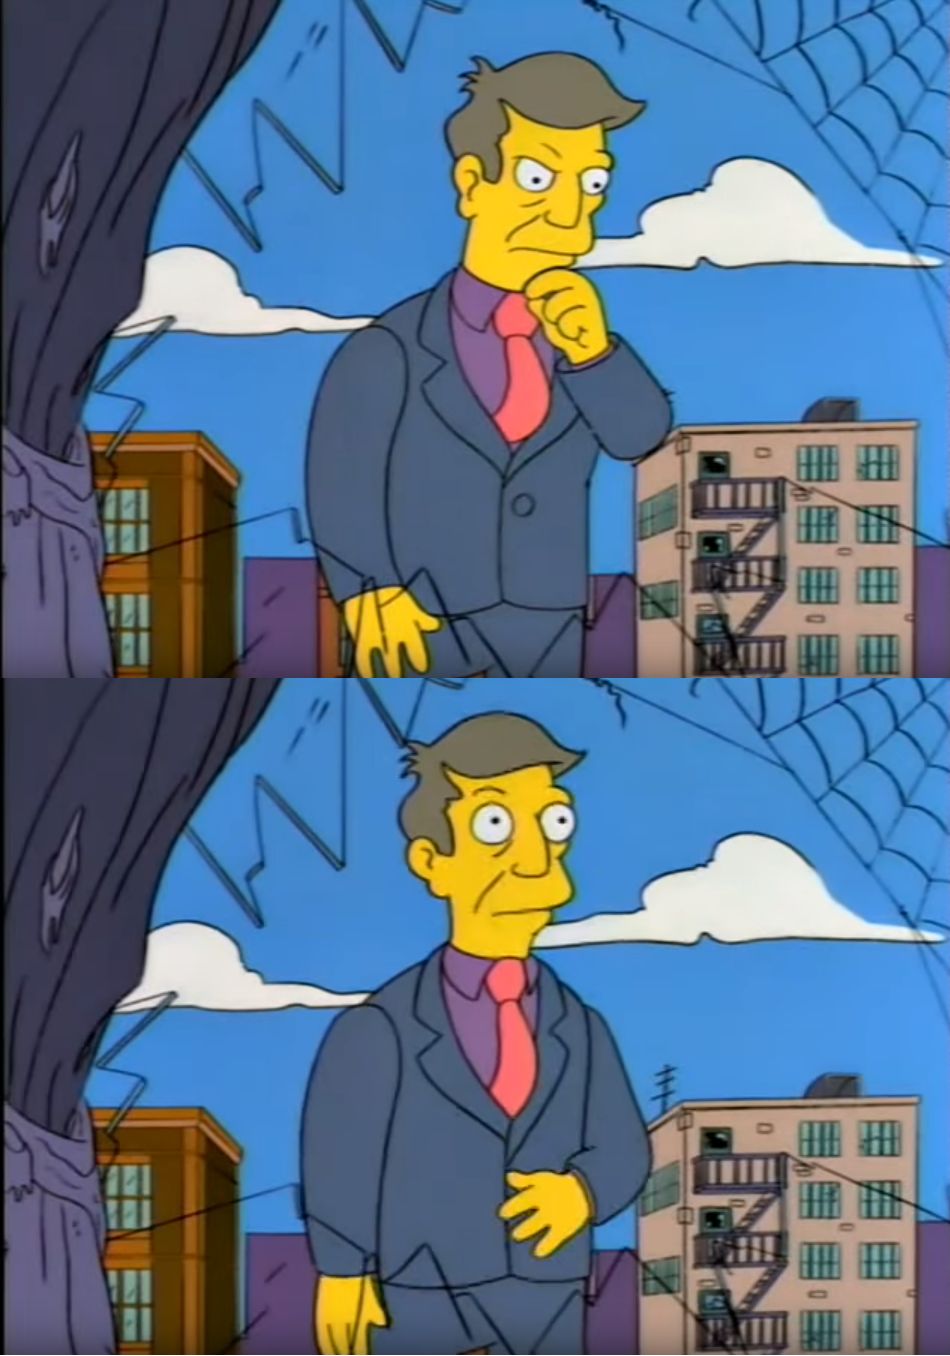 Skinner Out Of Touch Meme Generator - Imgflip